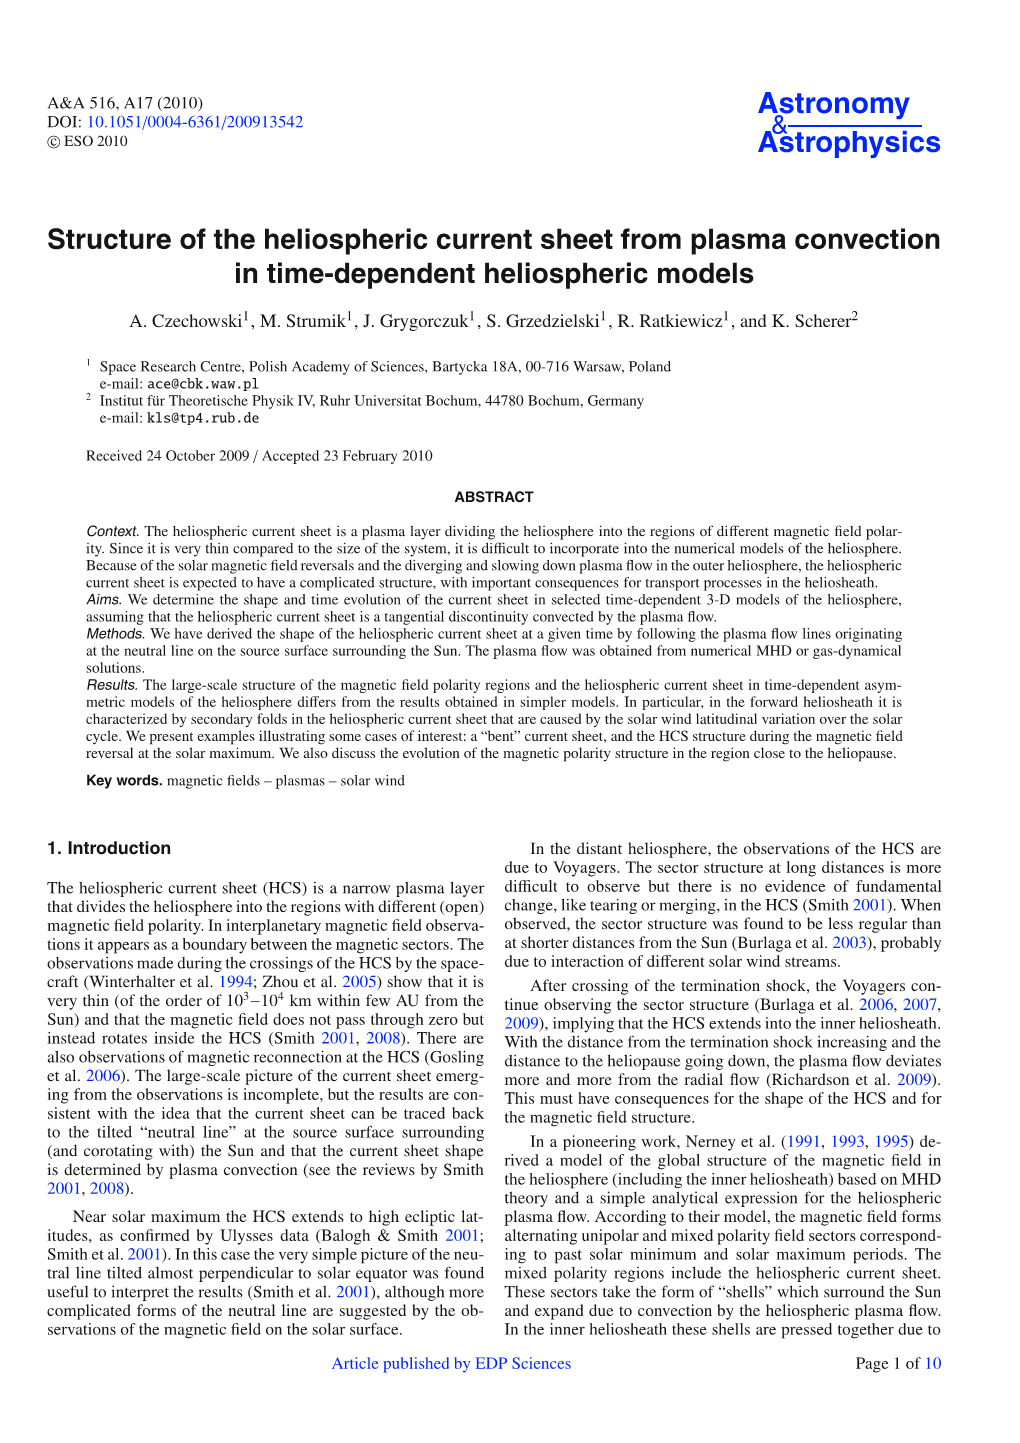 Structure of the Heliospheric Current Sheet from Plasma Convection in Time-Dependent Heliospheric Models